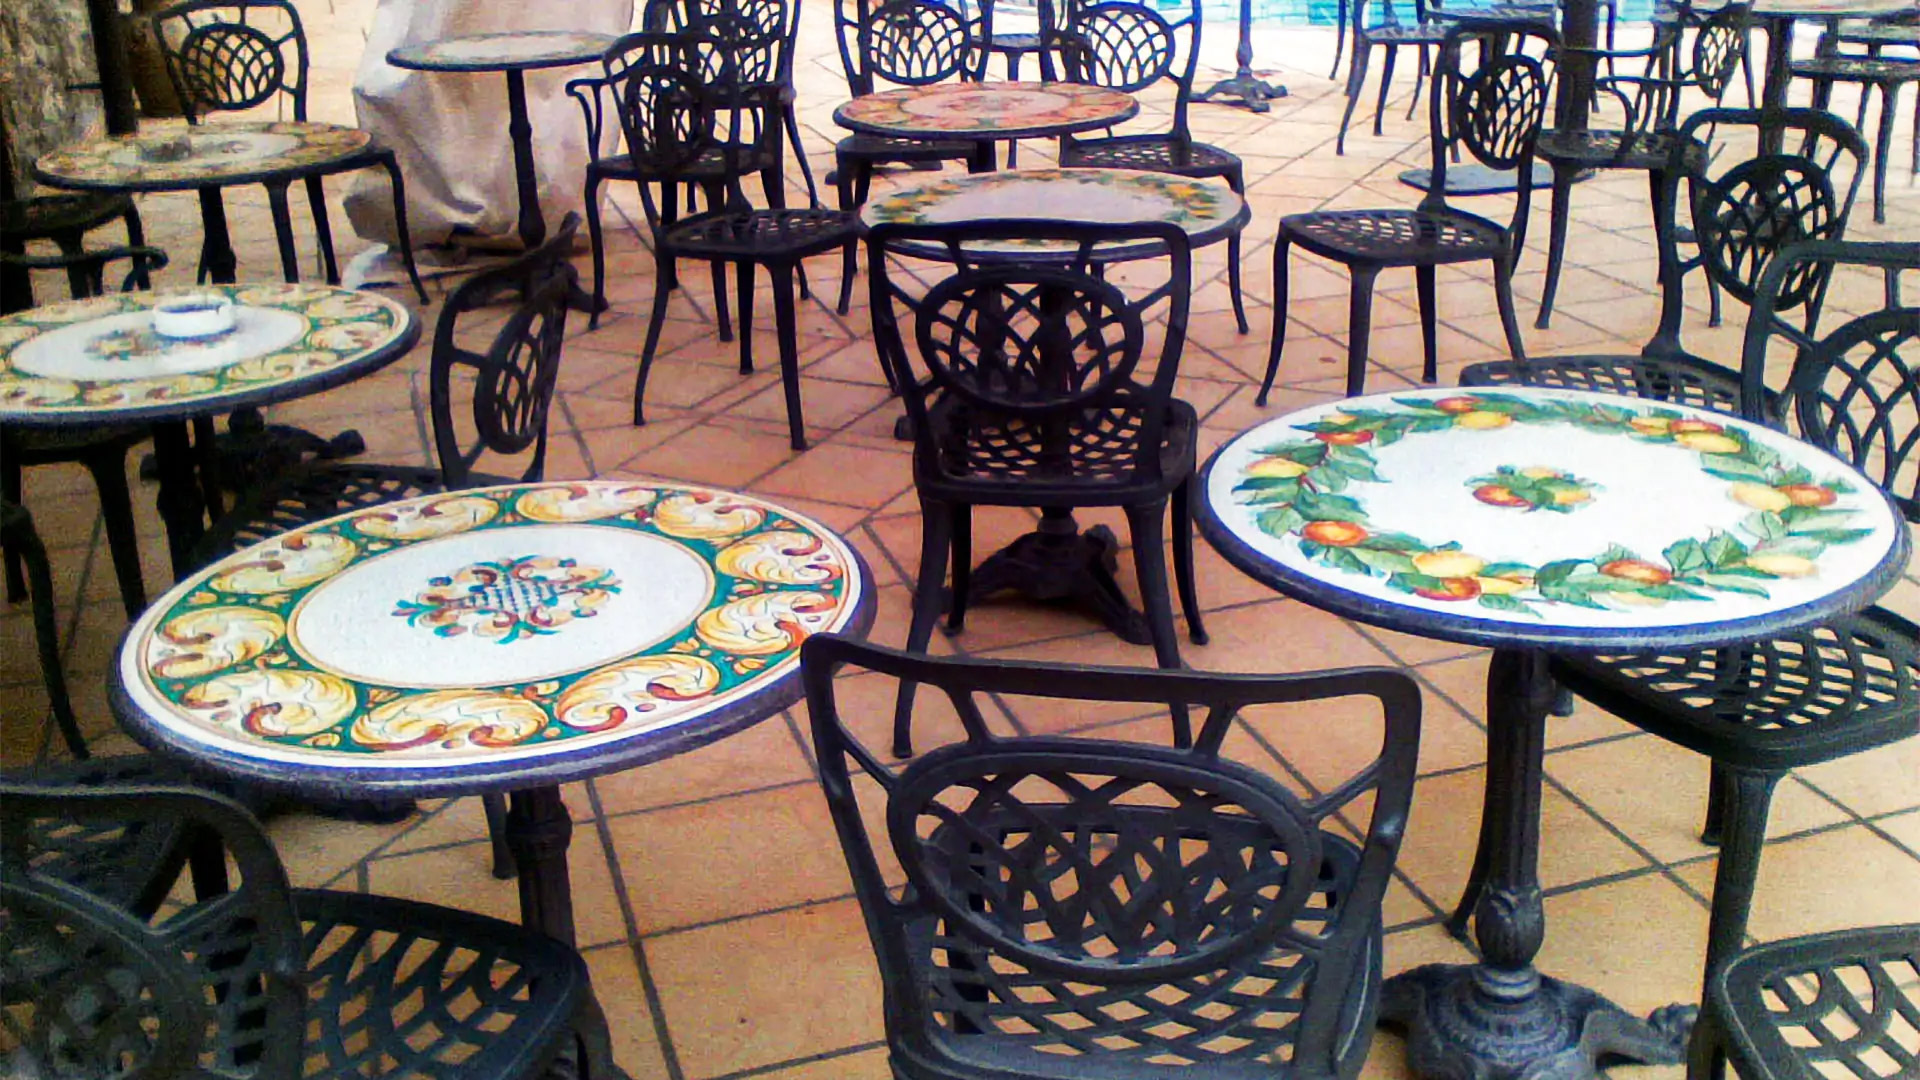 Tables for bars and pubs made of hand-decorated lava stone, iron bases and chairs